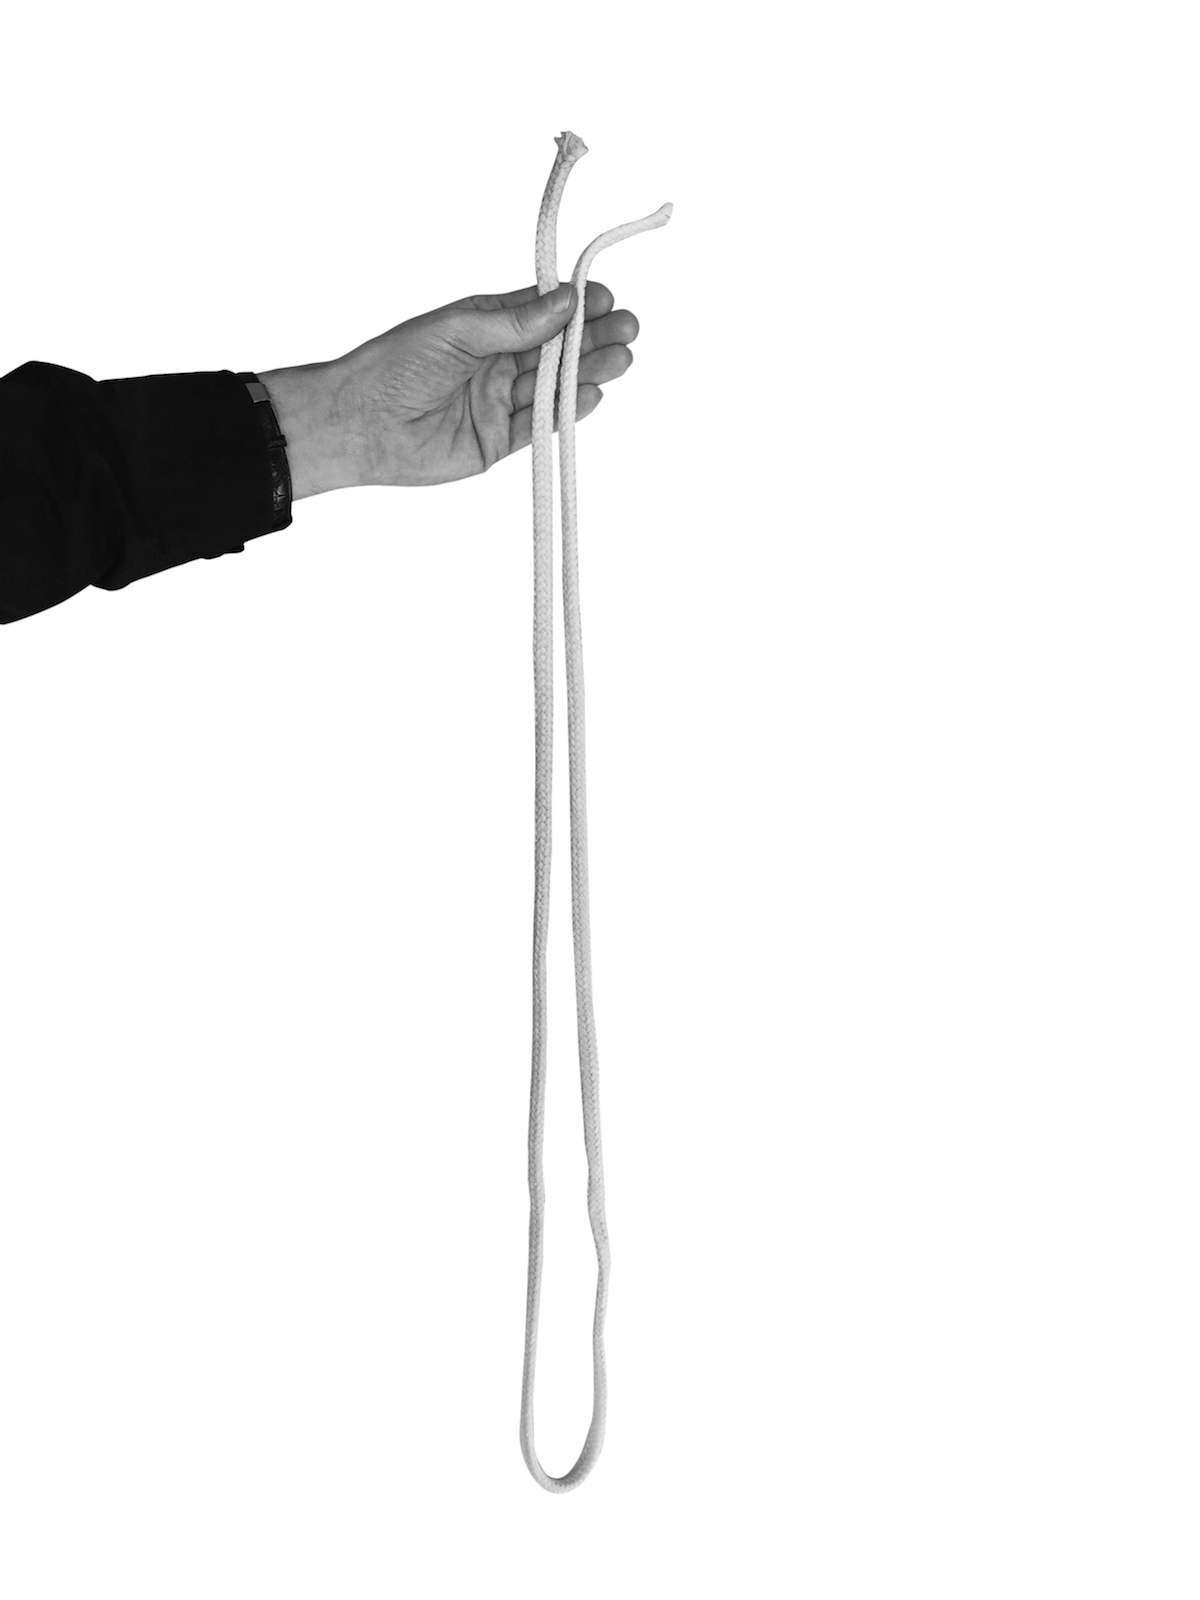 Cut and Restored Rope Trick Explained 